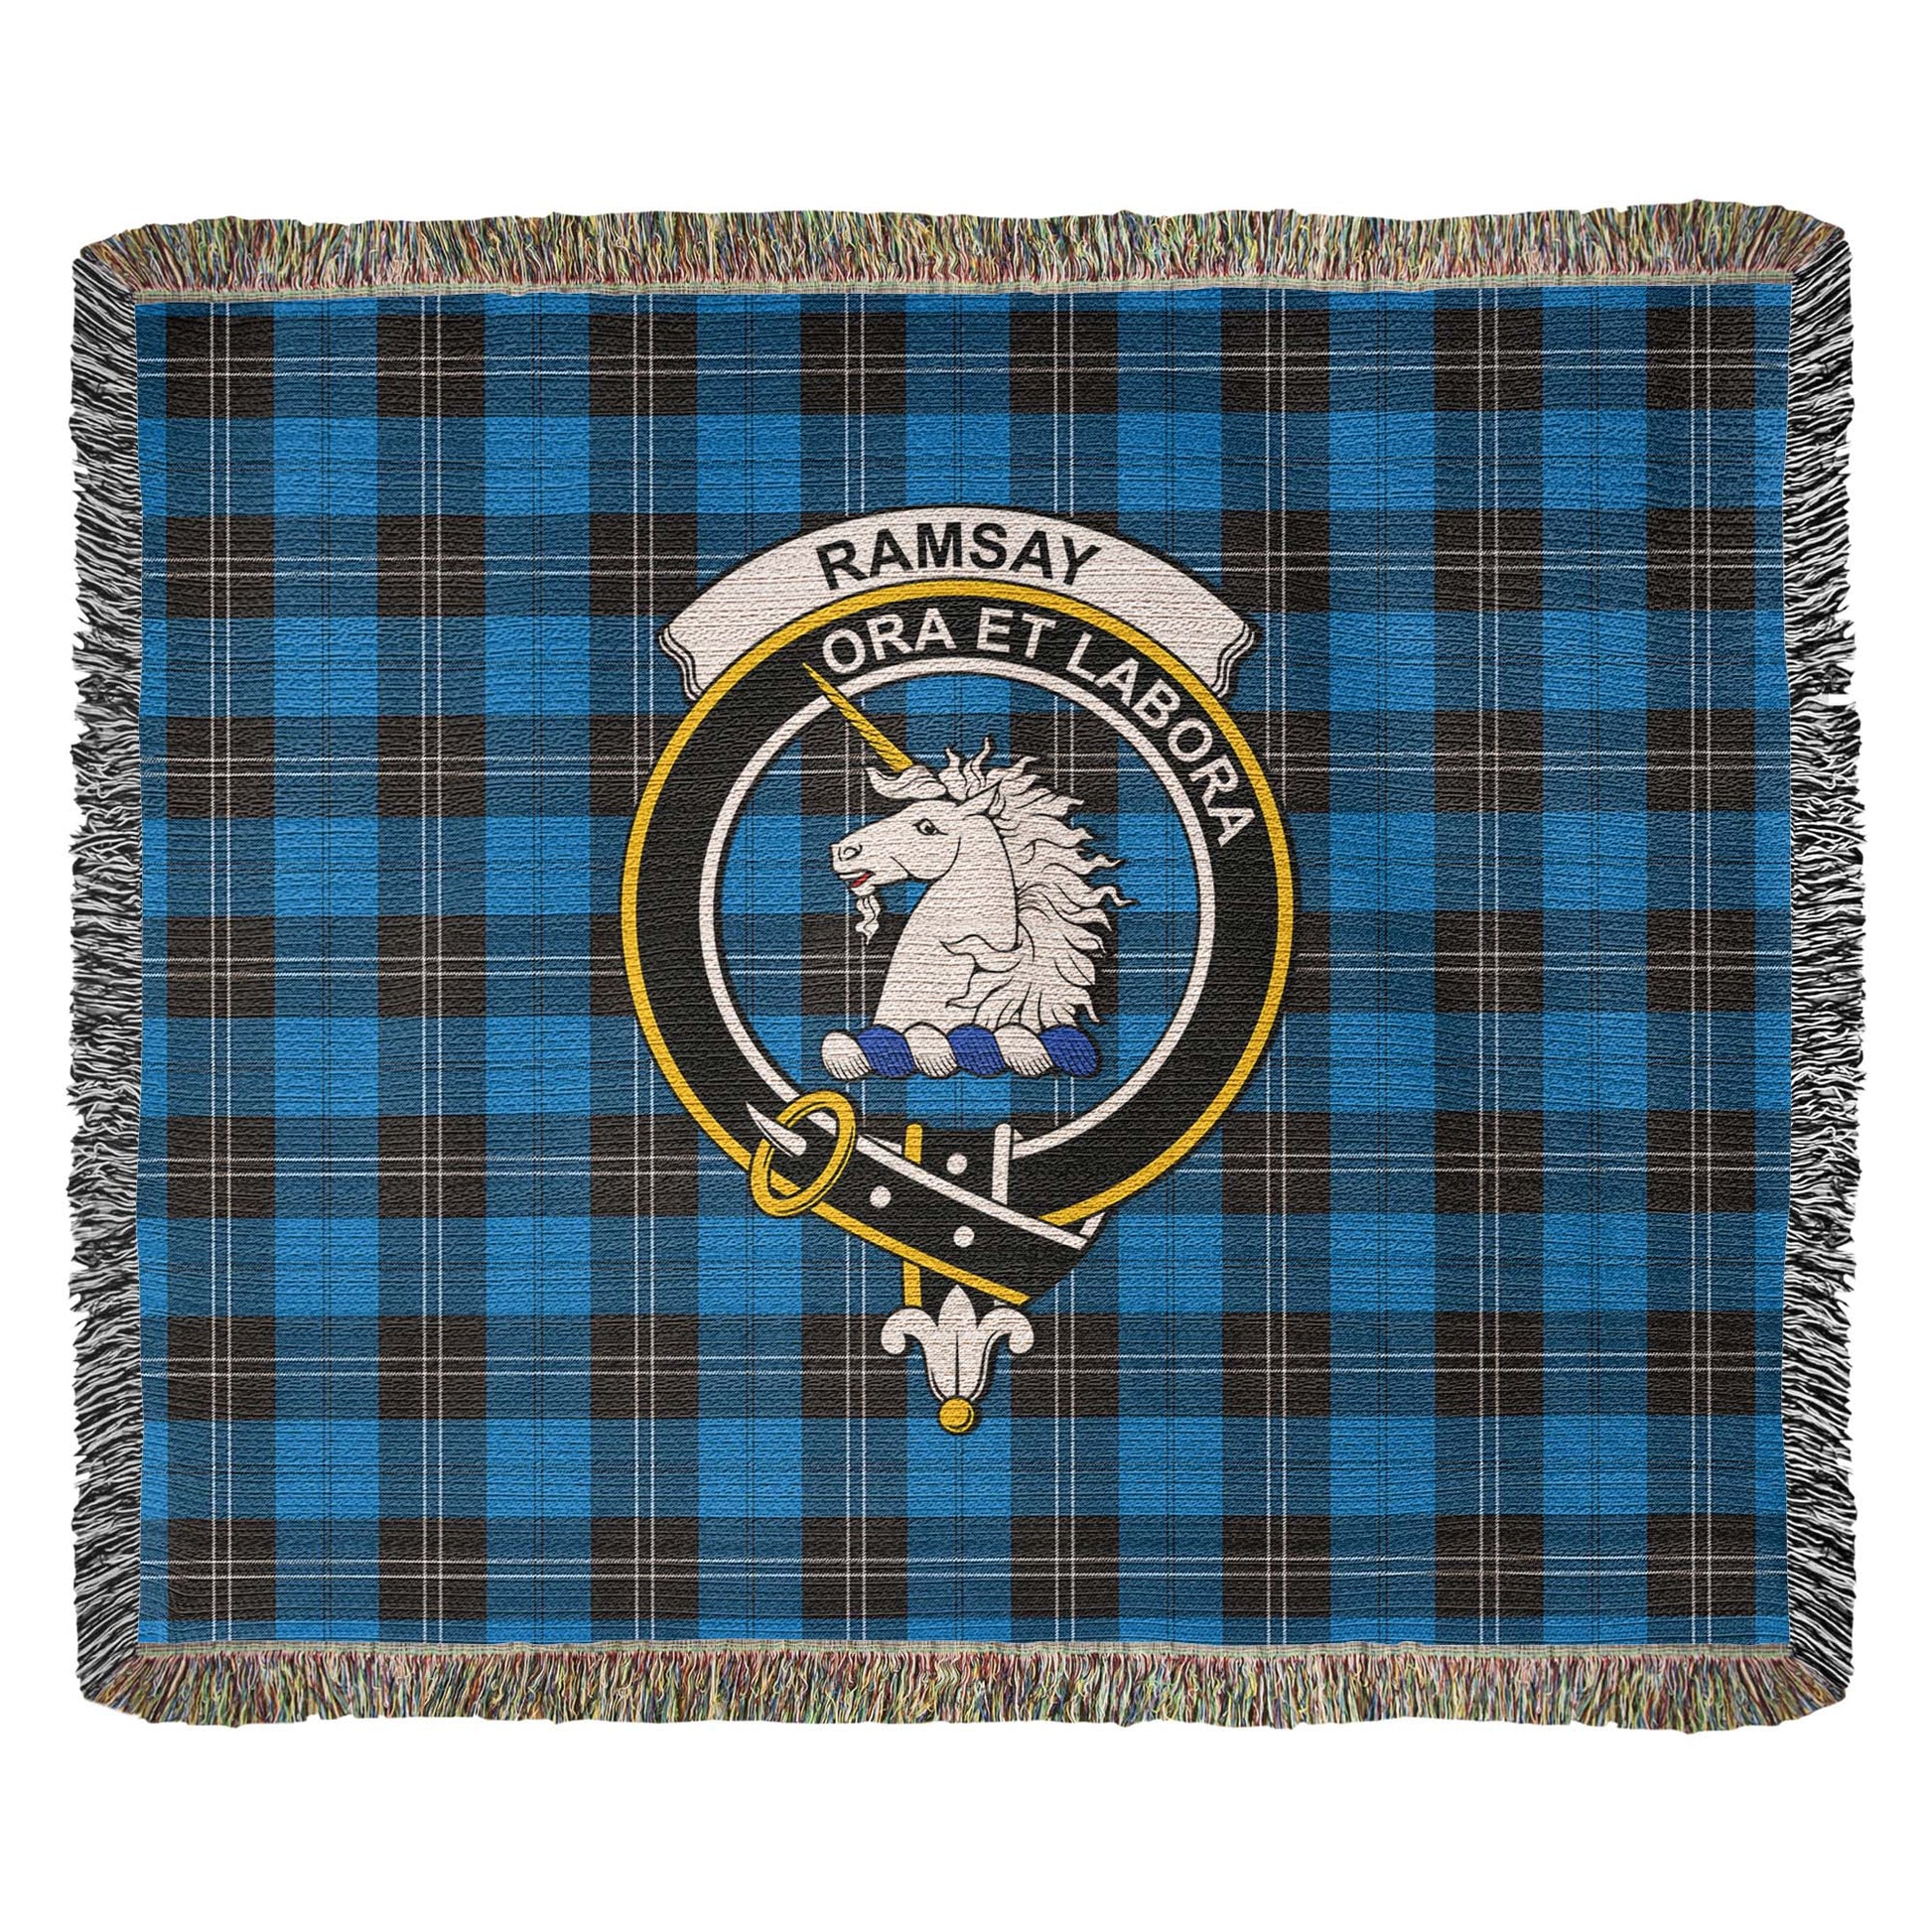 Tartan Vibes Clothing Ramsay Blue Ancient Tartan Woven Blanket with Family Crest